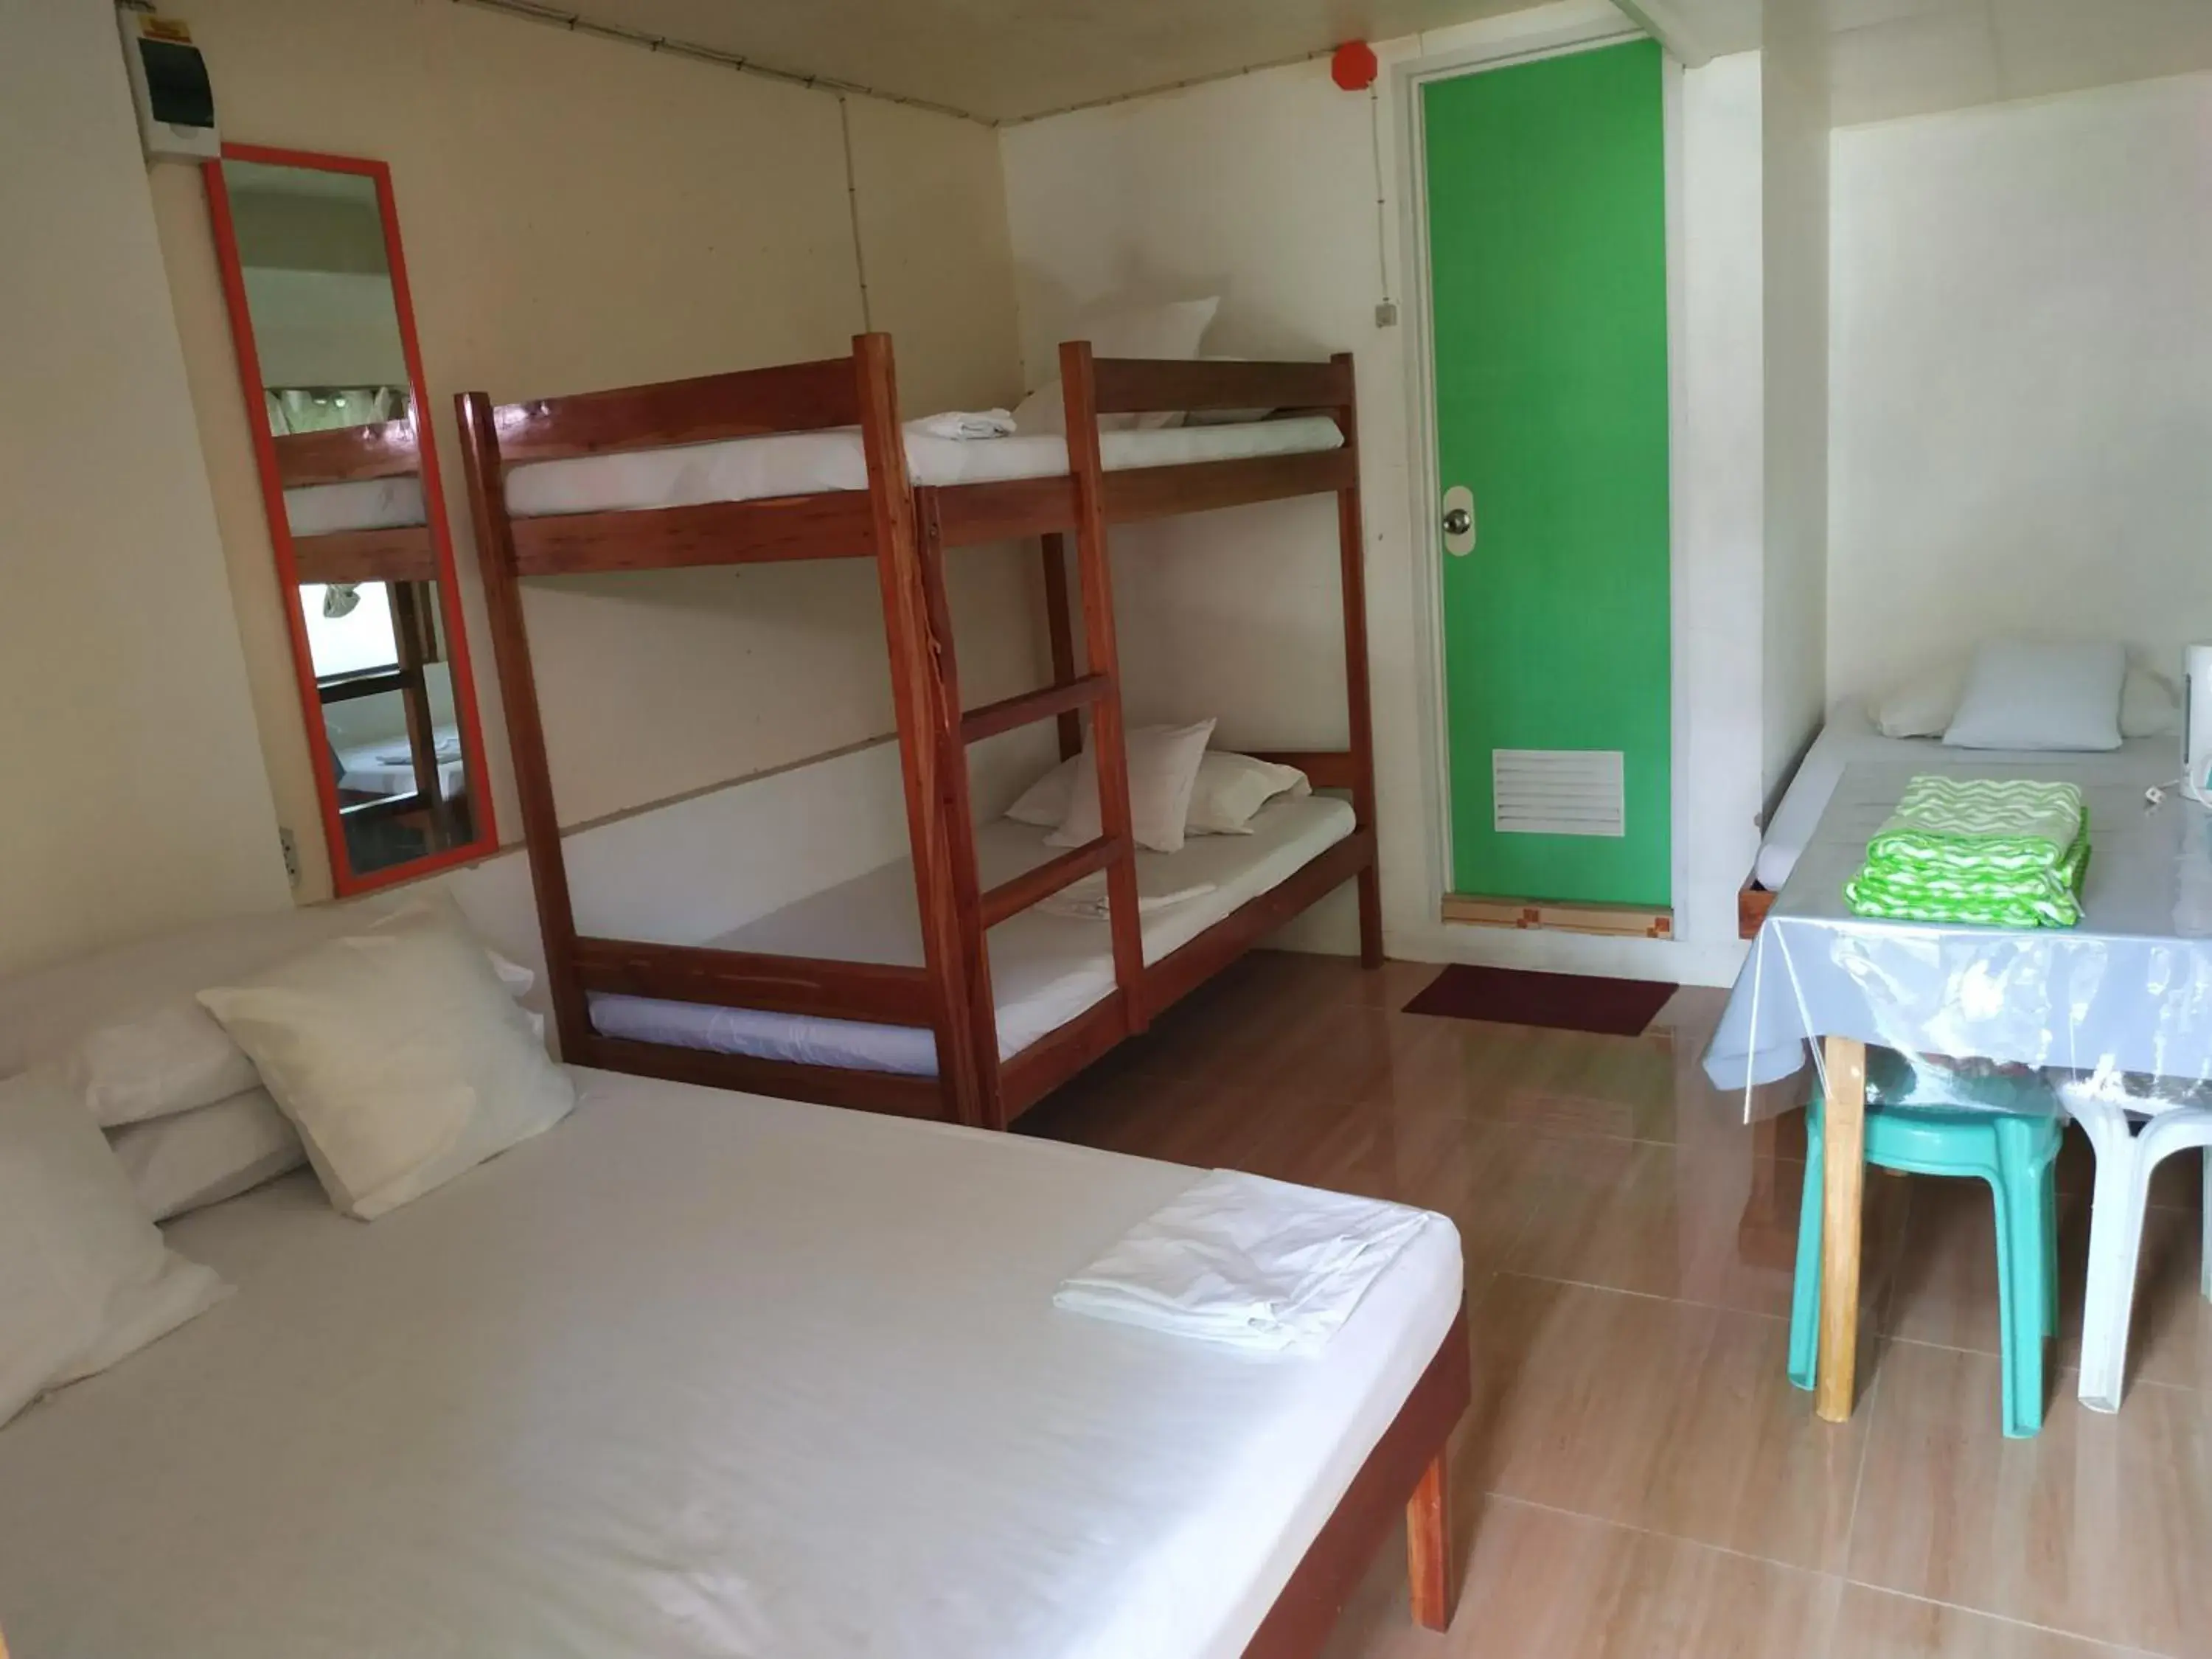 Bunk Bed in Emok's Guest House